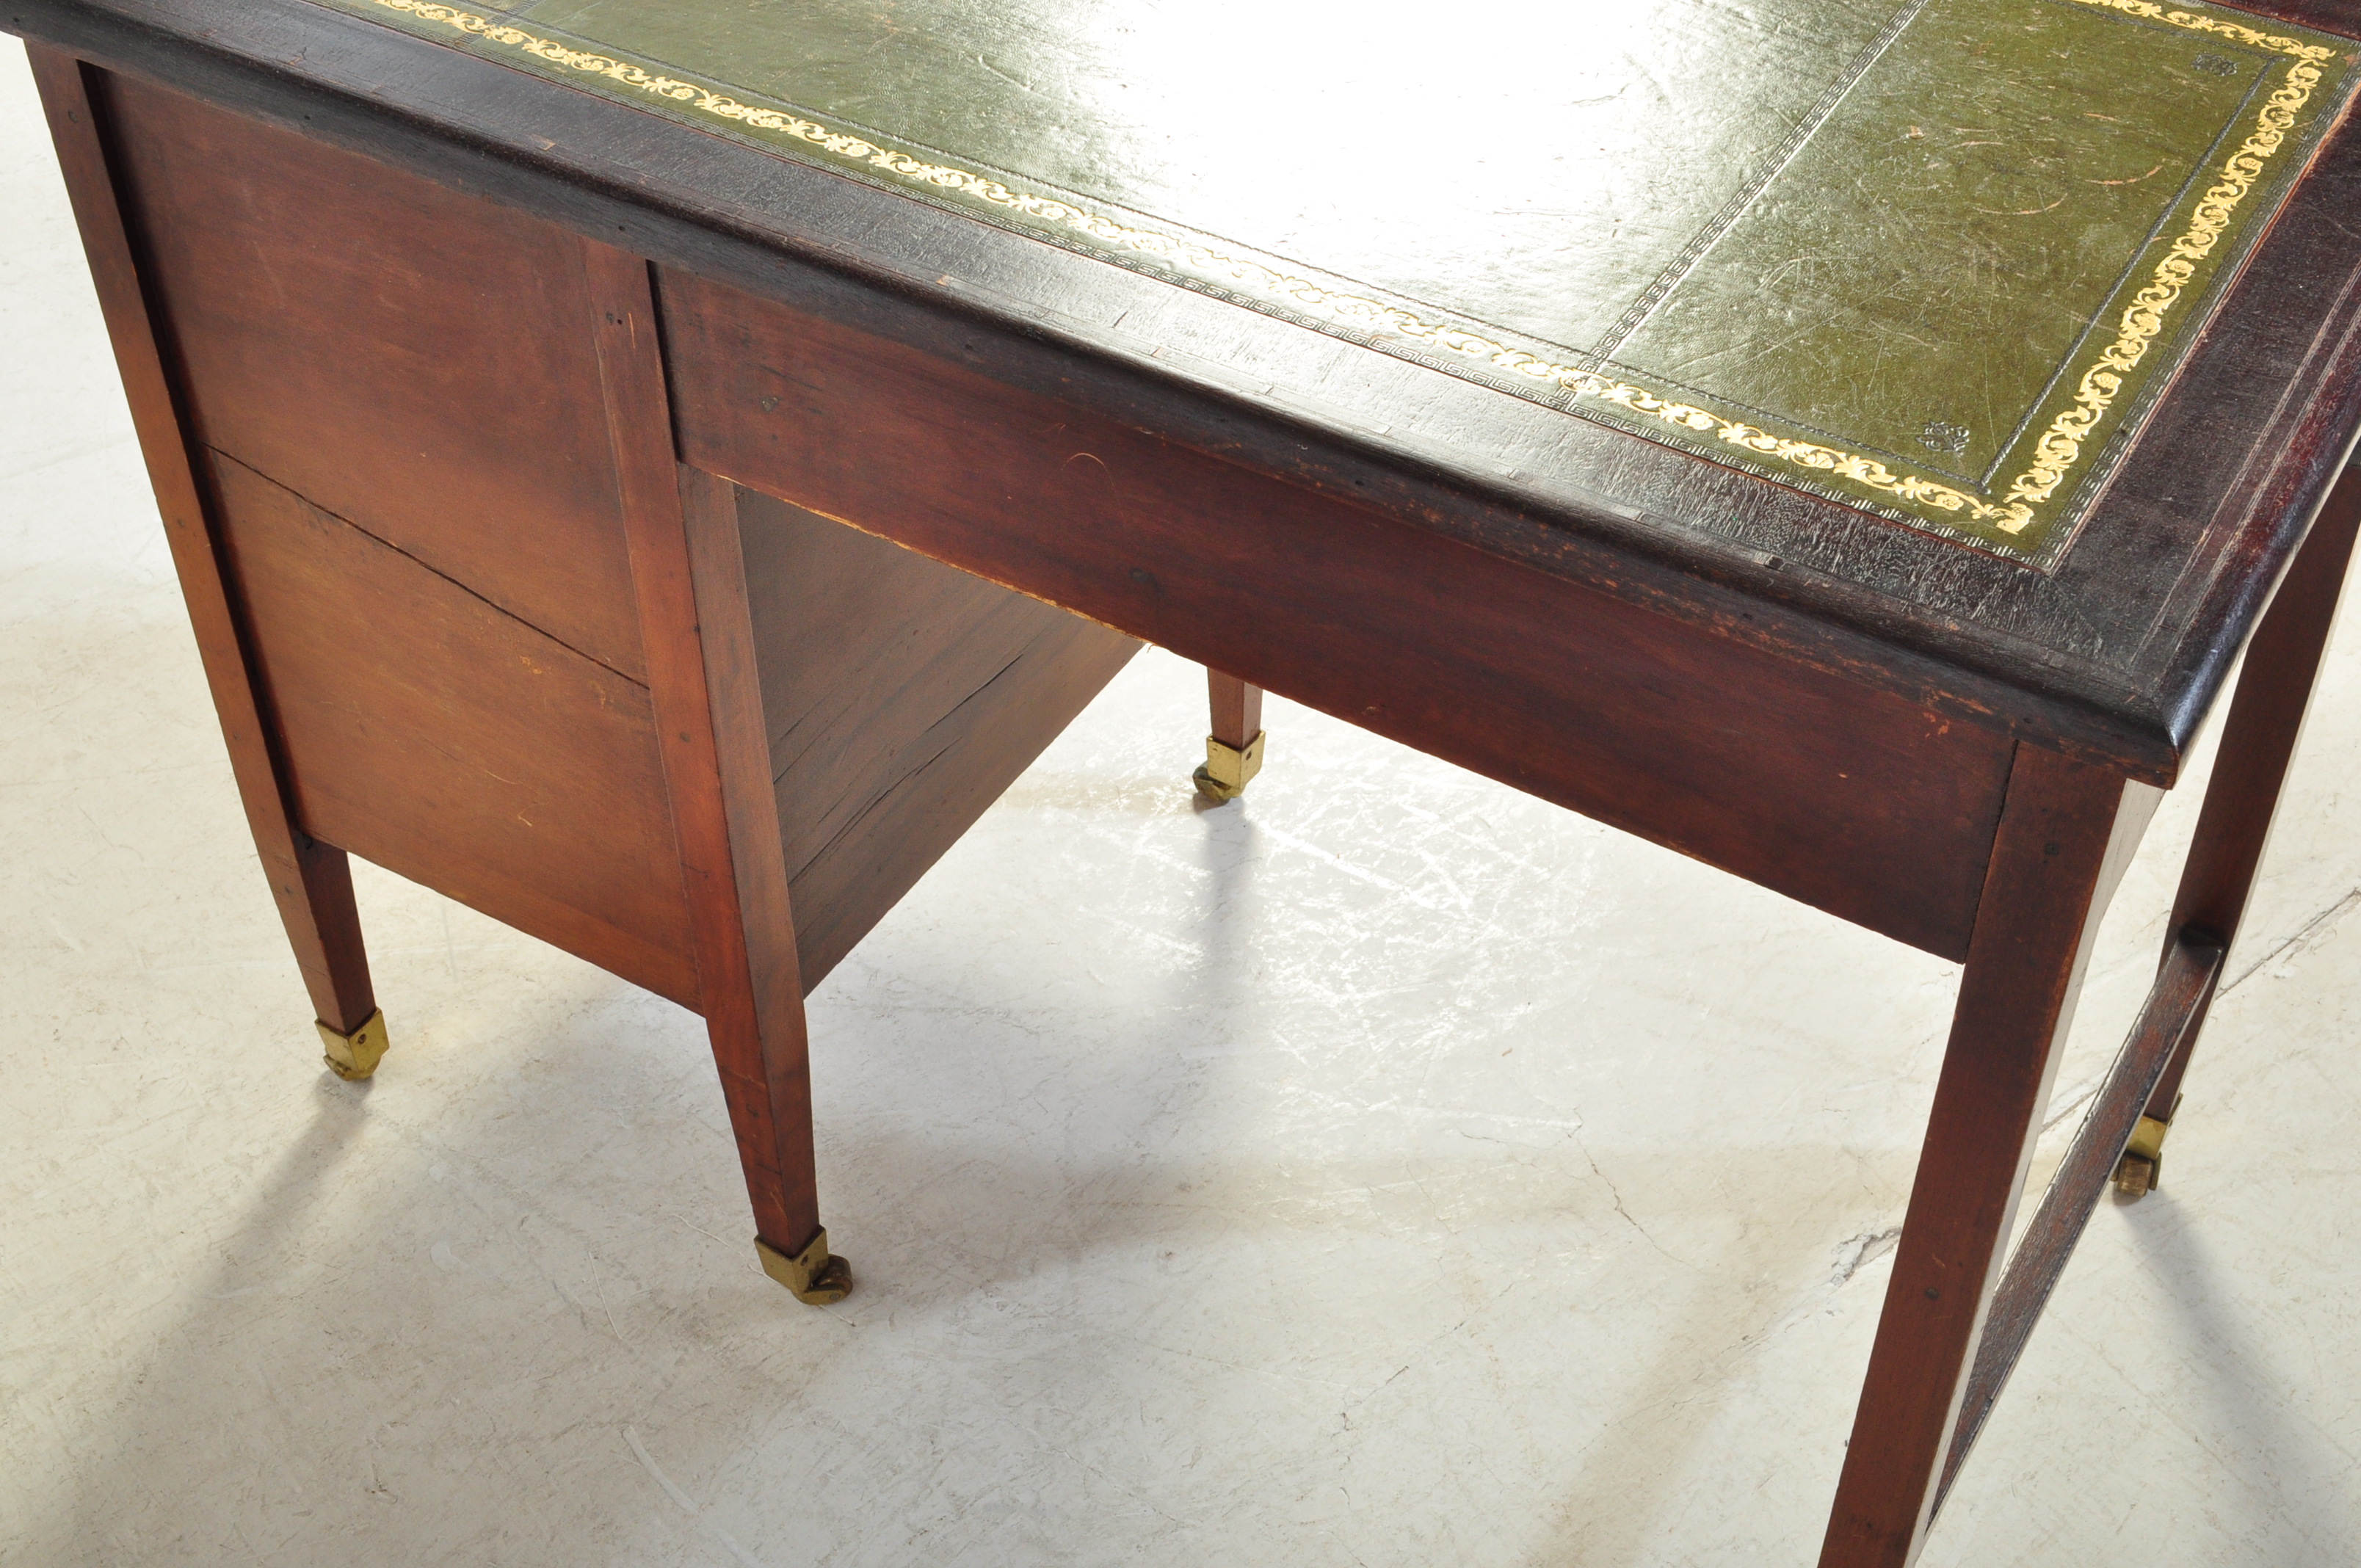 AN EDWARDIAN MAHOGANY LEATHER TOP WRITING DESK/TABLE - Image 6 of 7